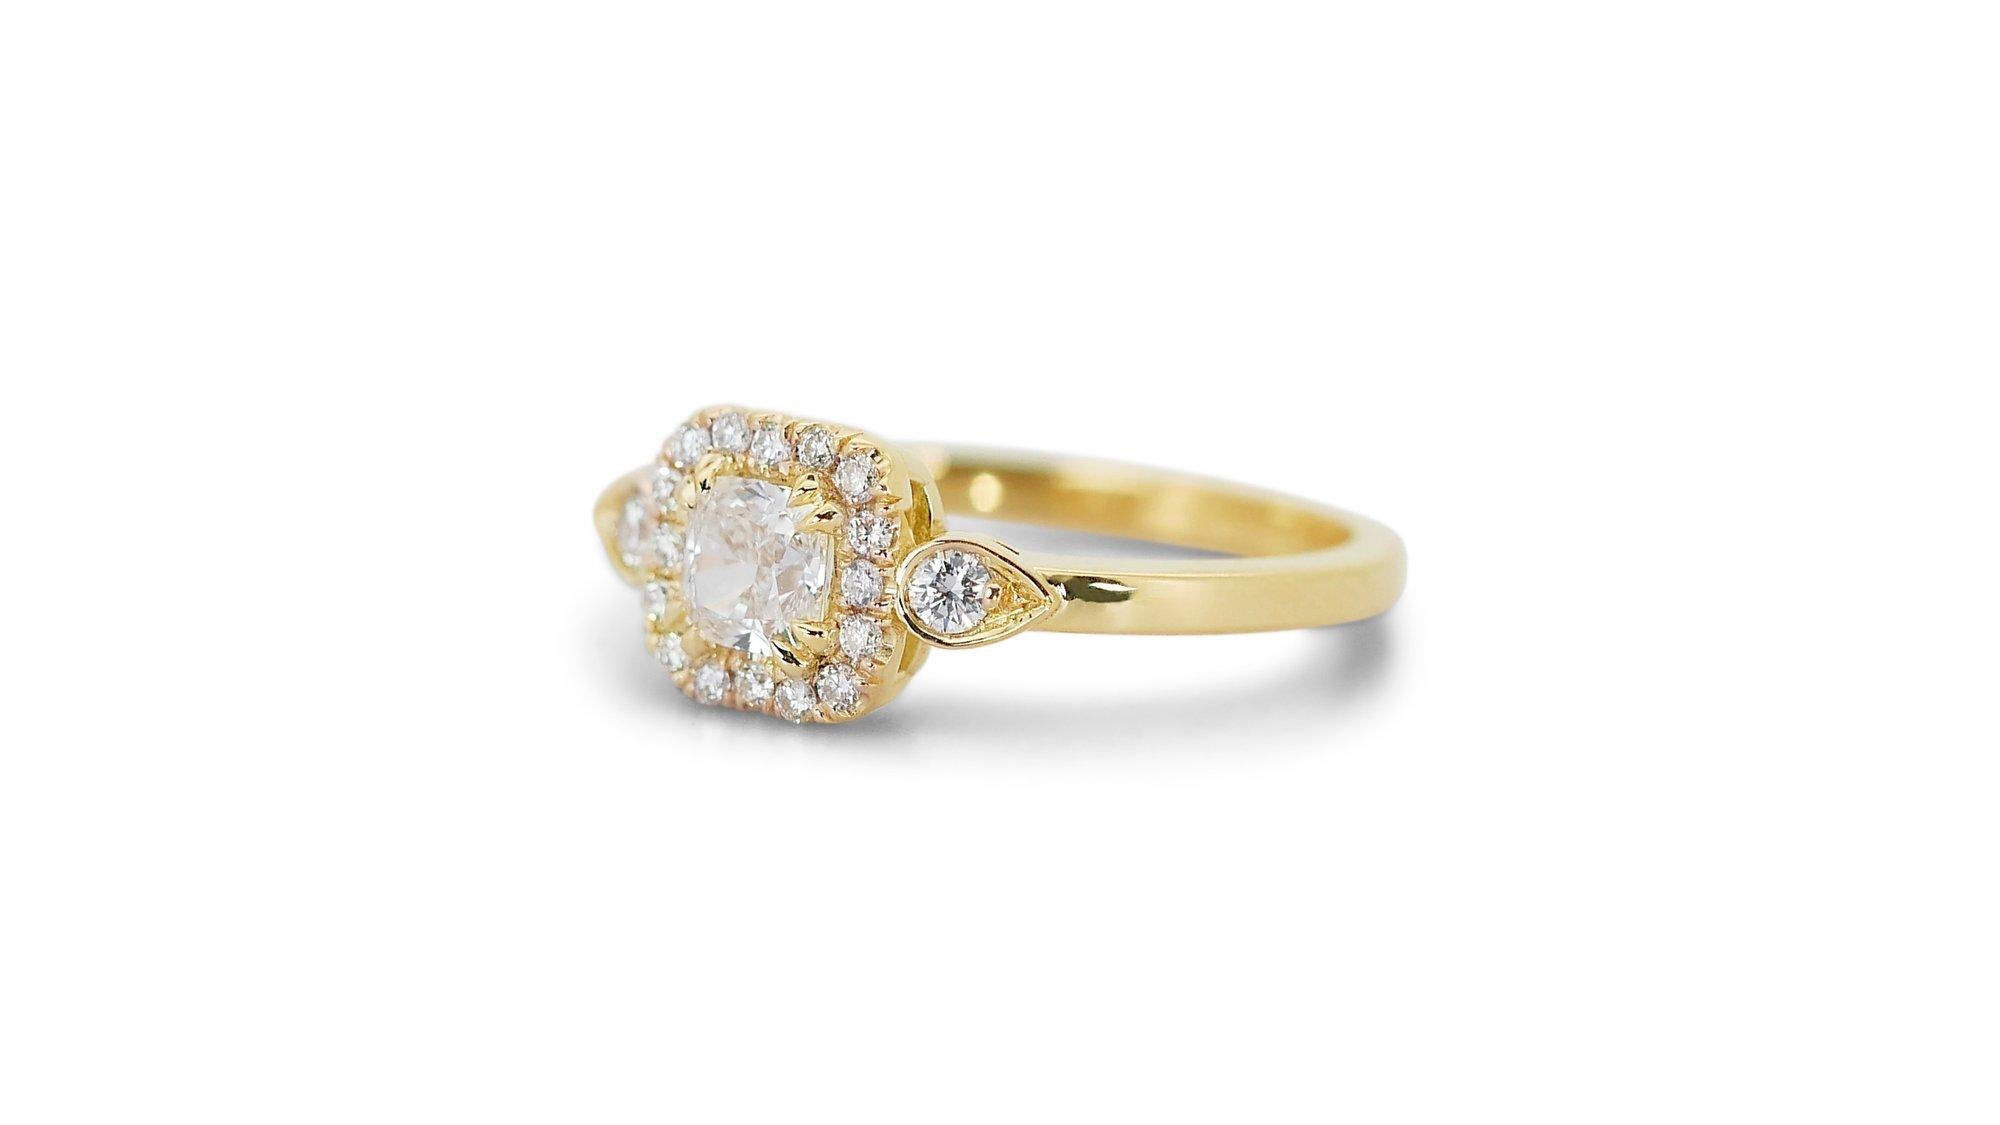 
Lustrous 18K Yellow Gold Halo Natural Diamond Ring w/1.03 ct - GIA Certified

This captivating ring features a stunning 0.72 carat center diamond, meticulously cut in a modified brilliant style to maximize its brilliance. Eighteen dazzling side